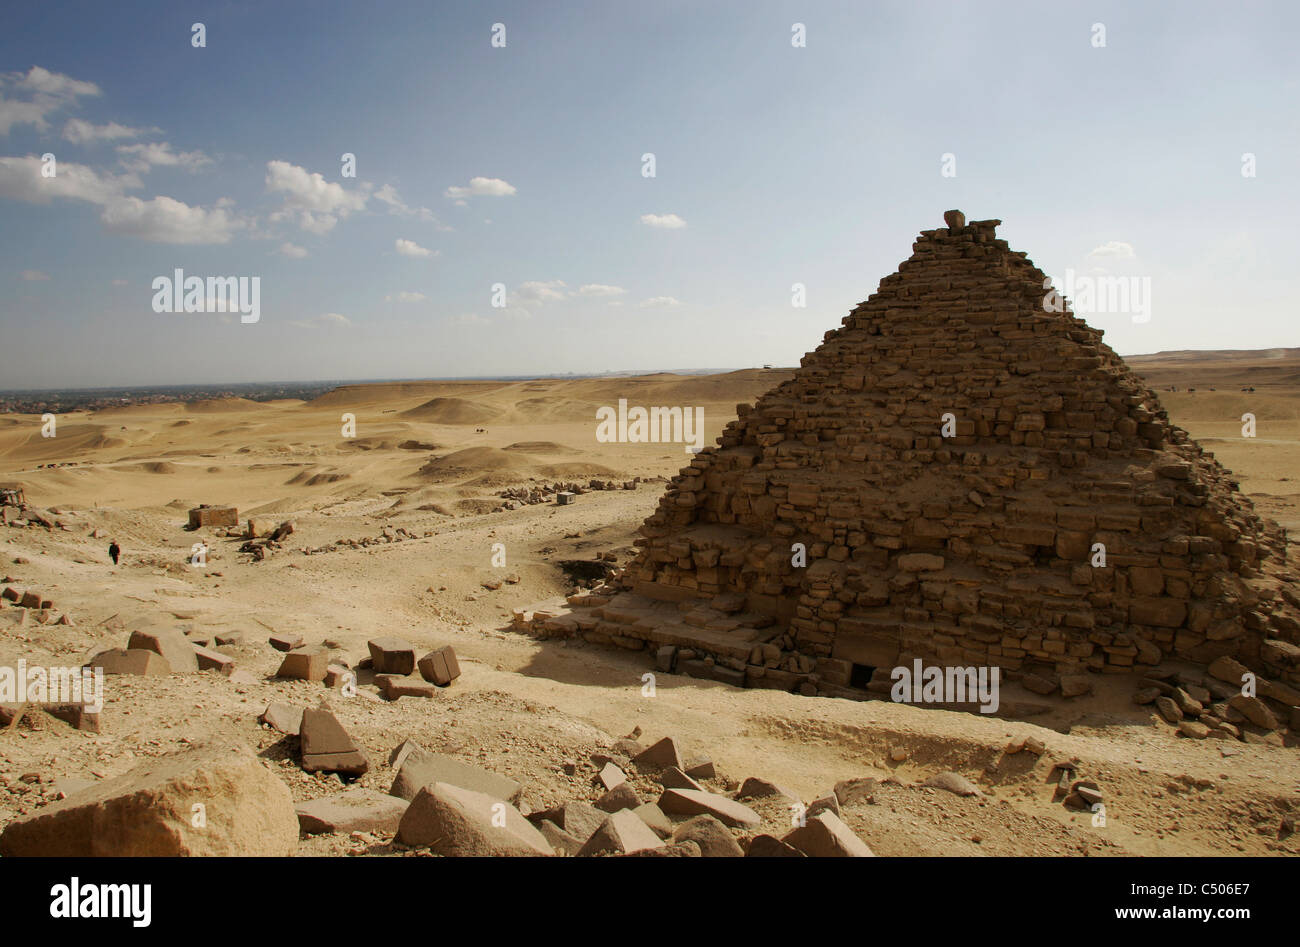 One of the three small pyramids built for Menkaure's three Queens on the Giza plateau, Cairo, Egypt Stock Photo